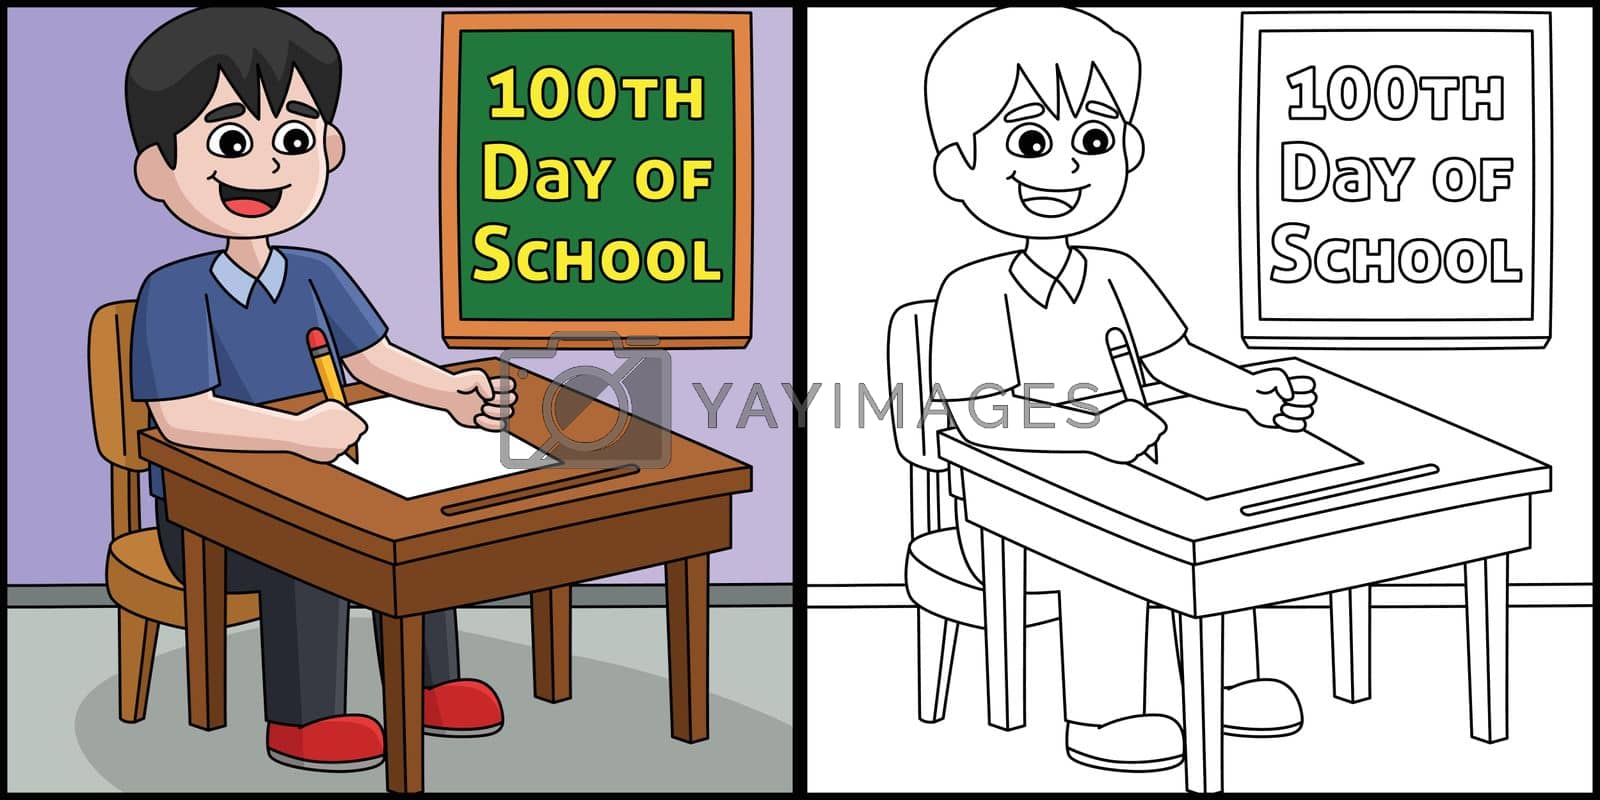 Royalty free image of 100th Day Of School Student Writing Illustration by abbydesign